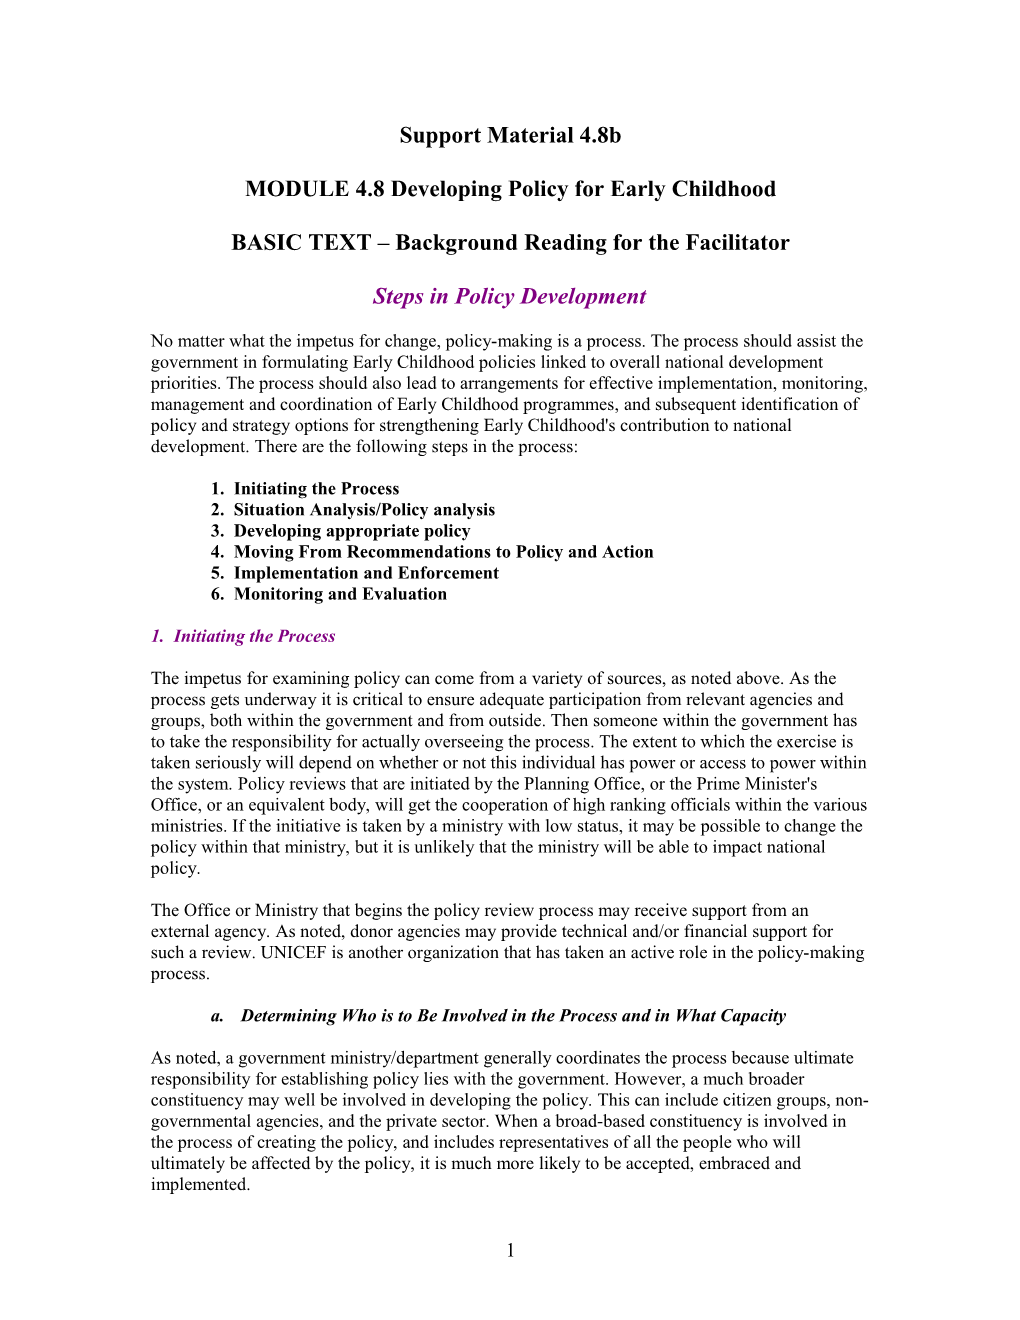 MODULE 4.8Developing Policy for Early Childhood